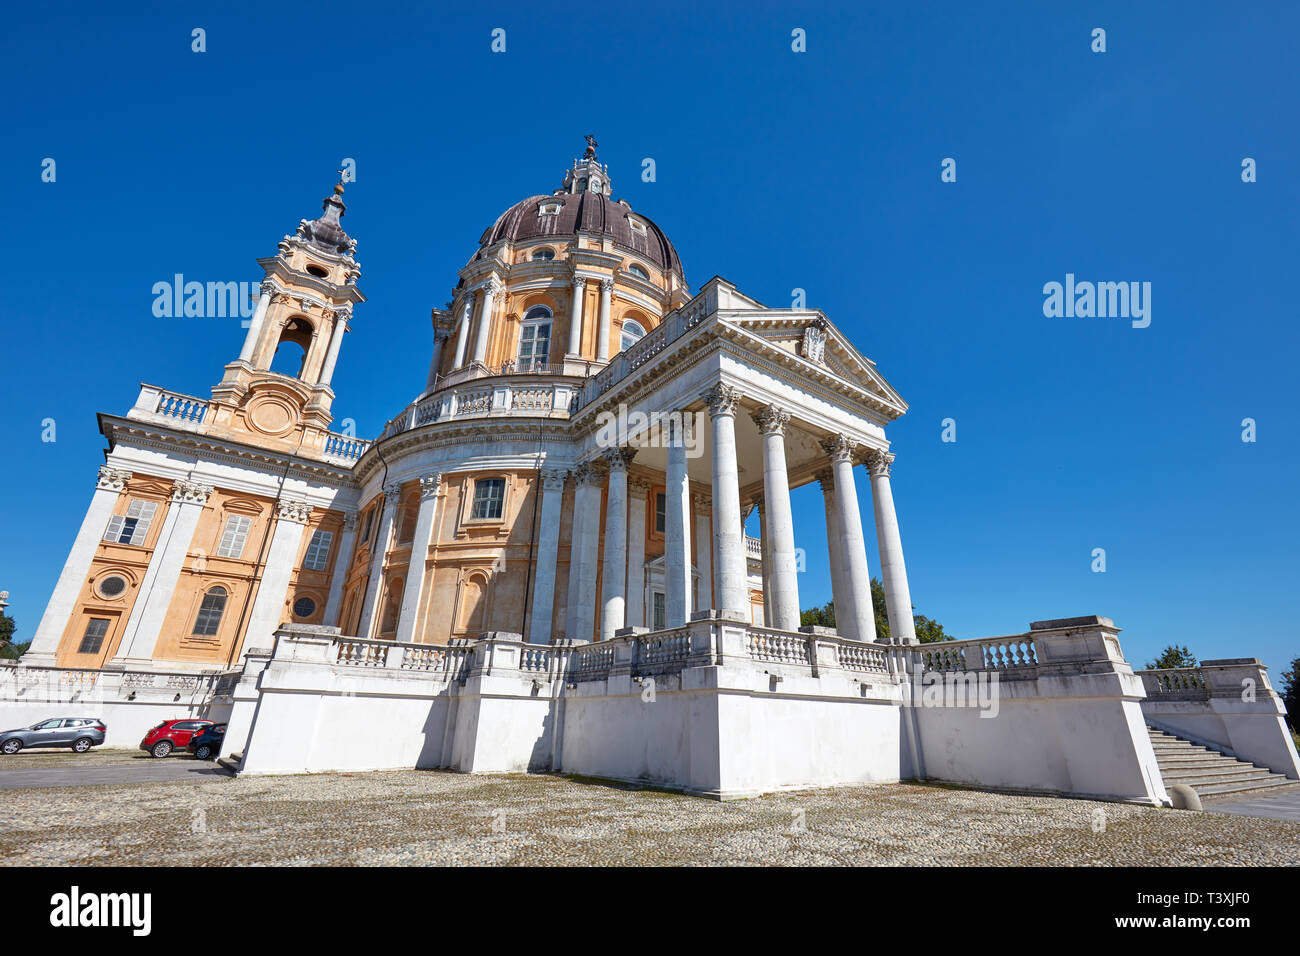 TURIN, ITALY - AUGUST 21, 2017: Superga basilica on Turin hills, wide angle view in a sunny summer day in Italy Stock Photo